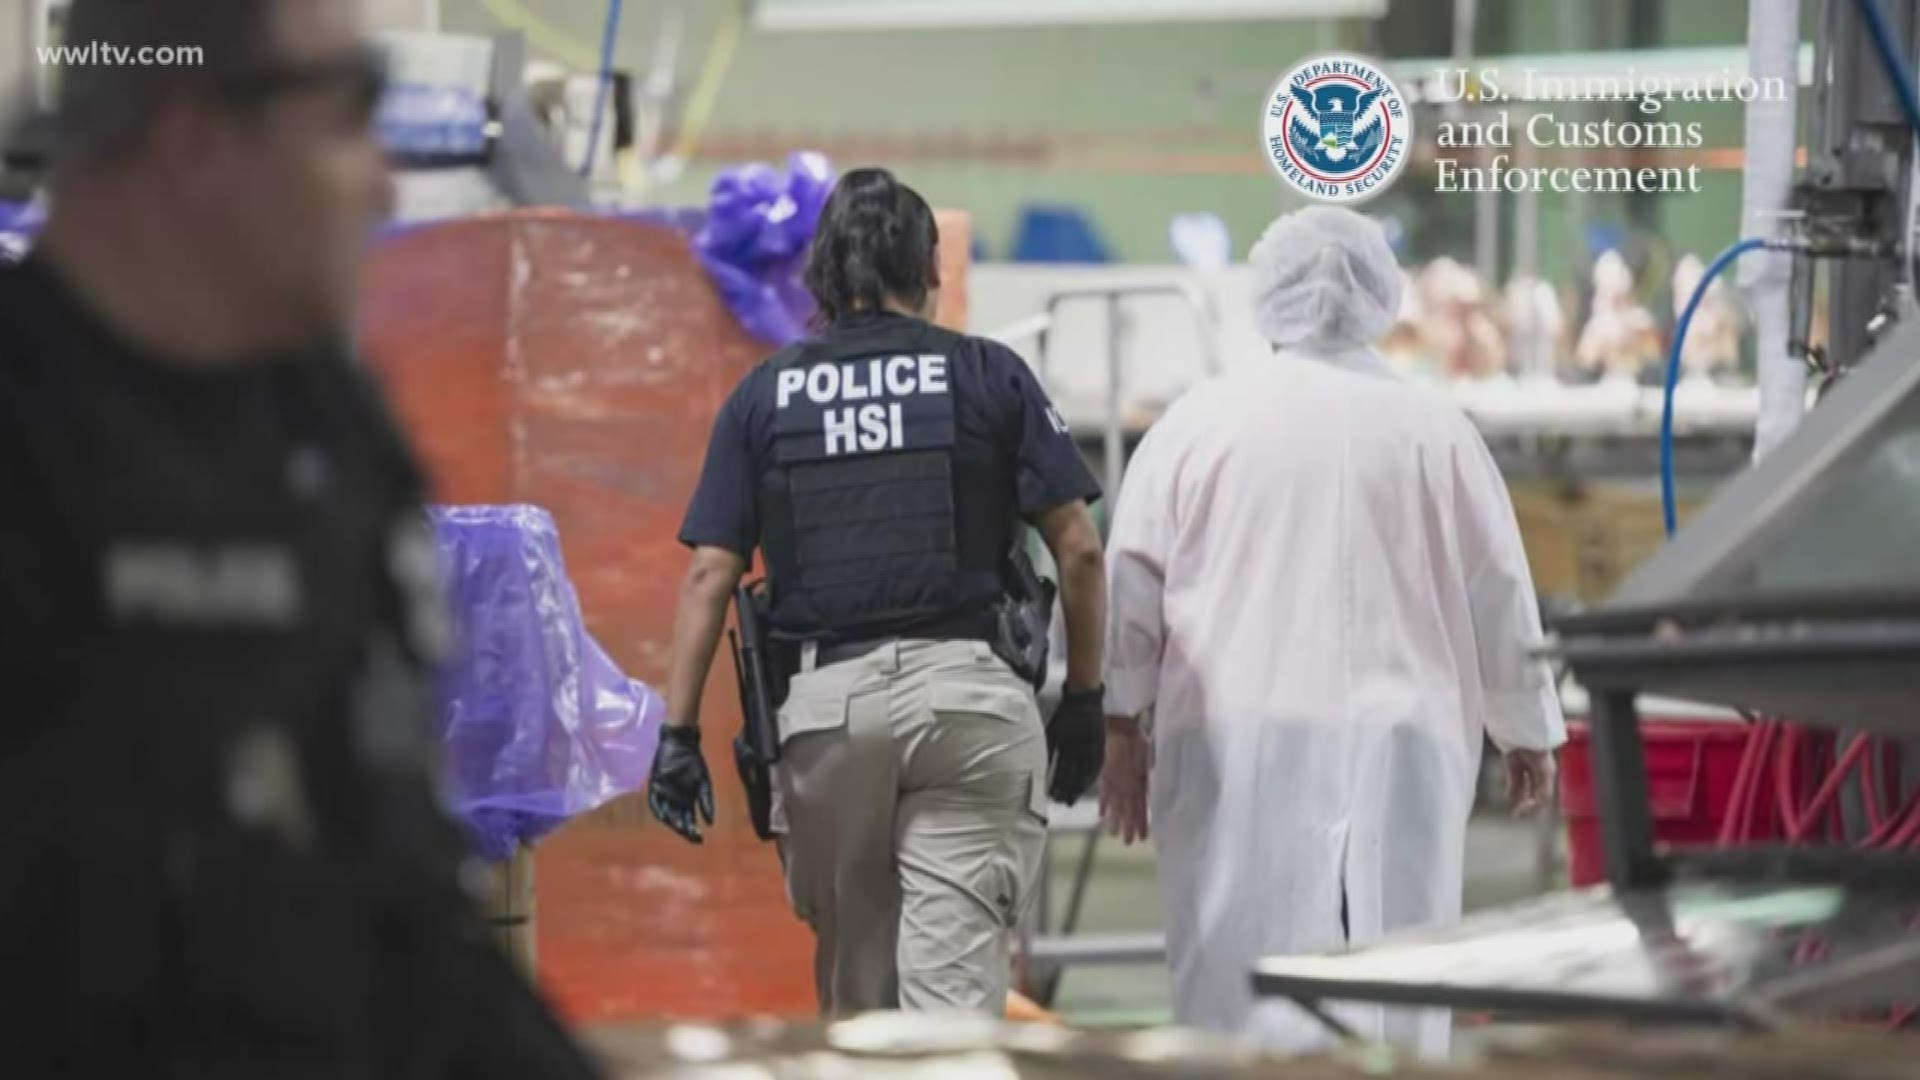 U.S. Immigration and Customs Enforcement raided seven plants as part of an ongoing work site investigation.